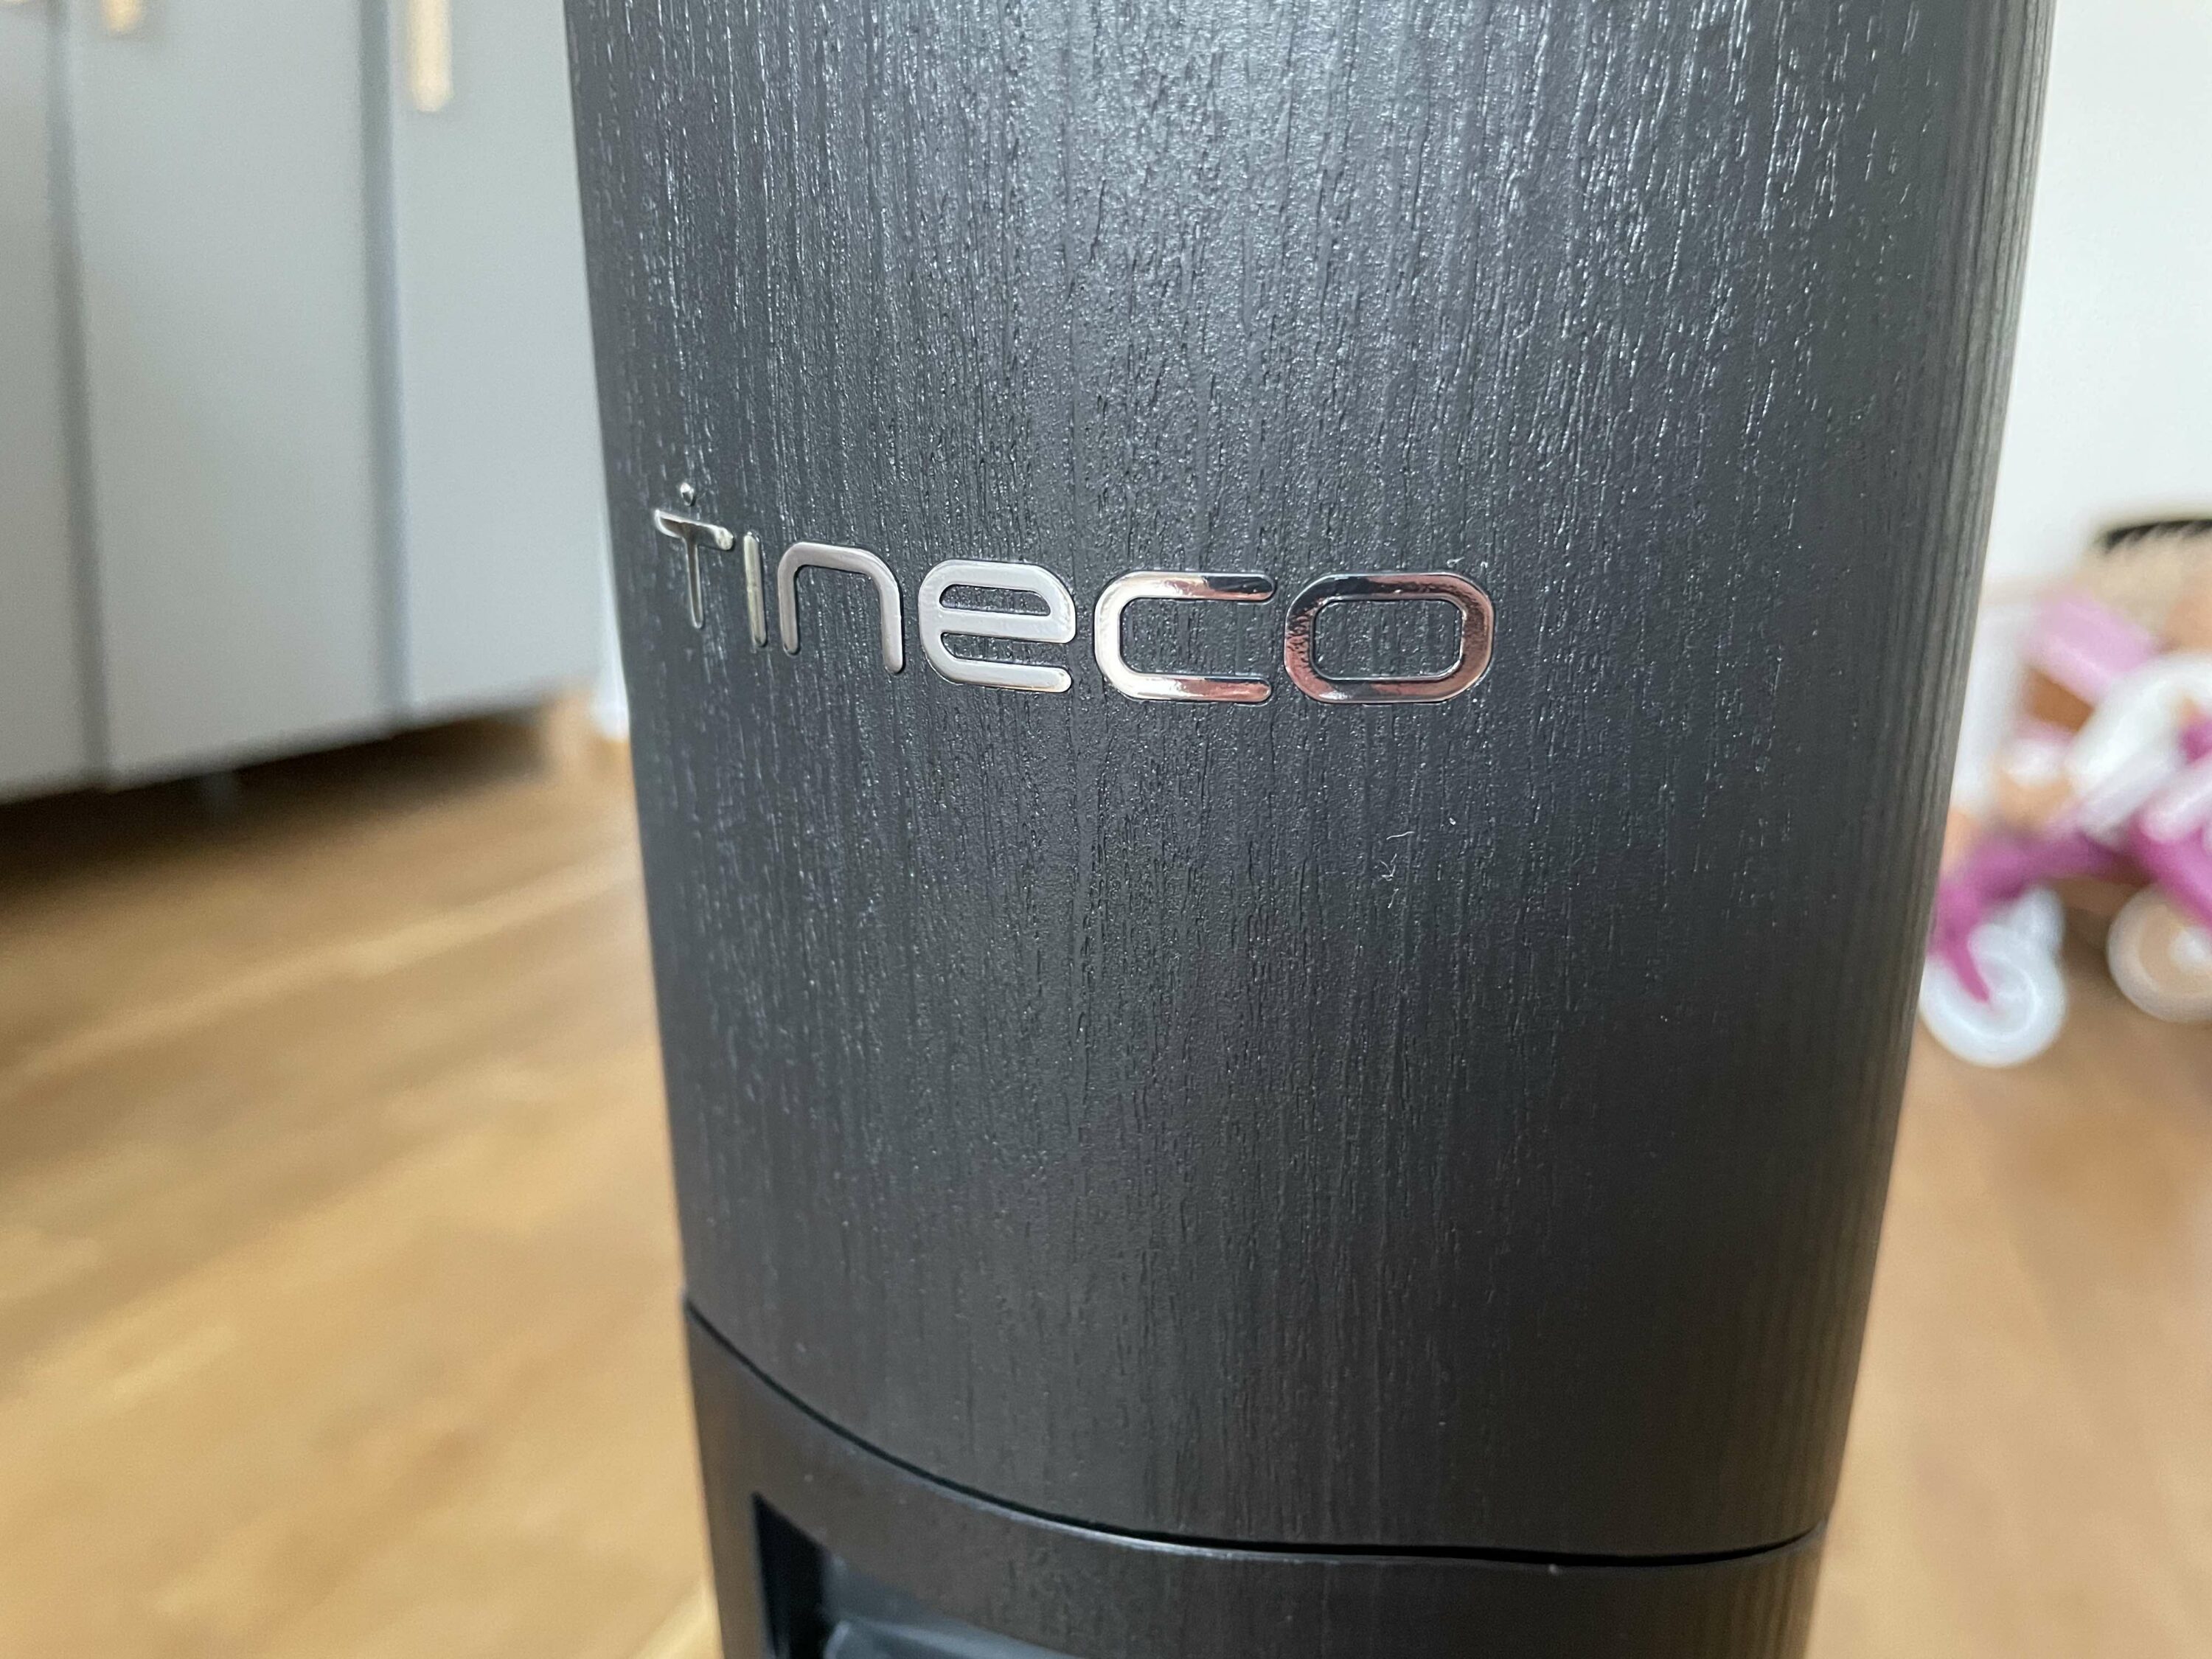 IFA 2022: Tineco Floor One S7 Pro introduced